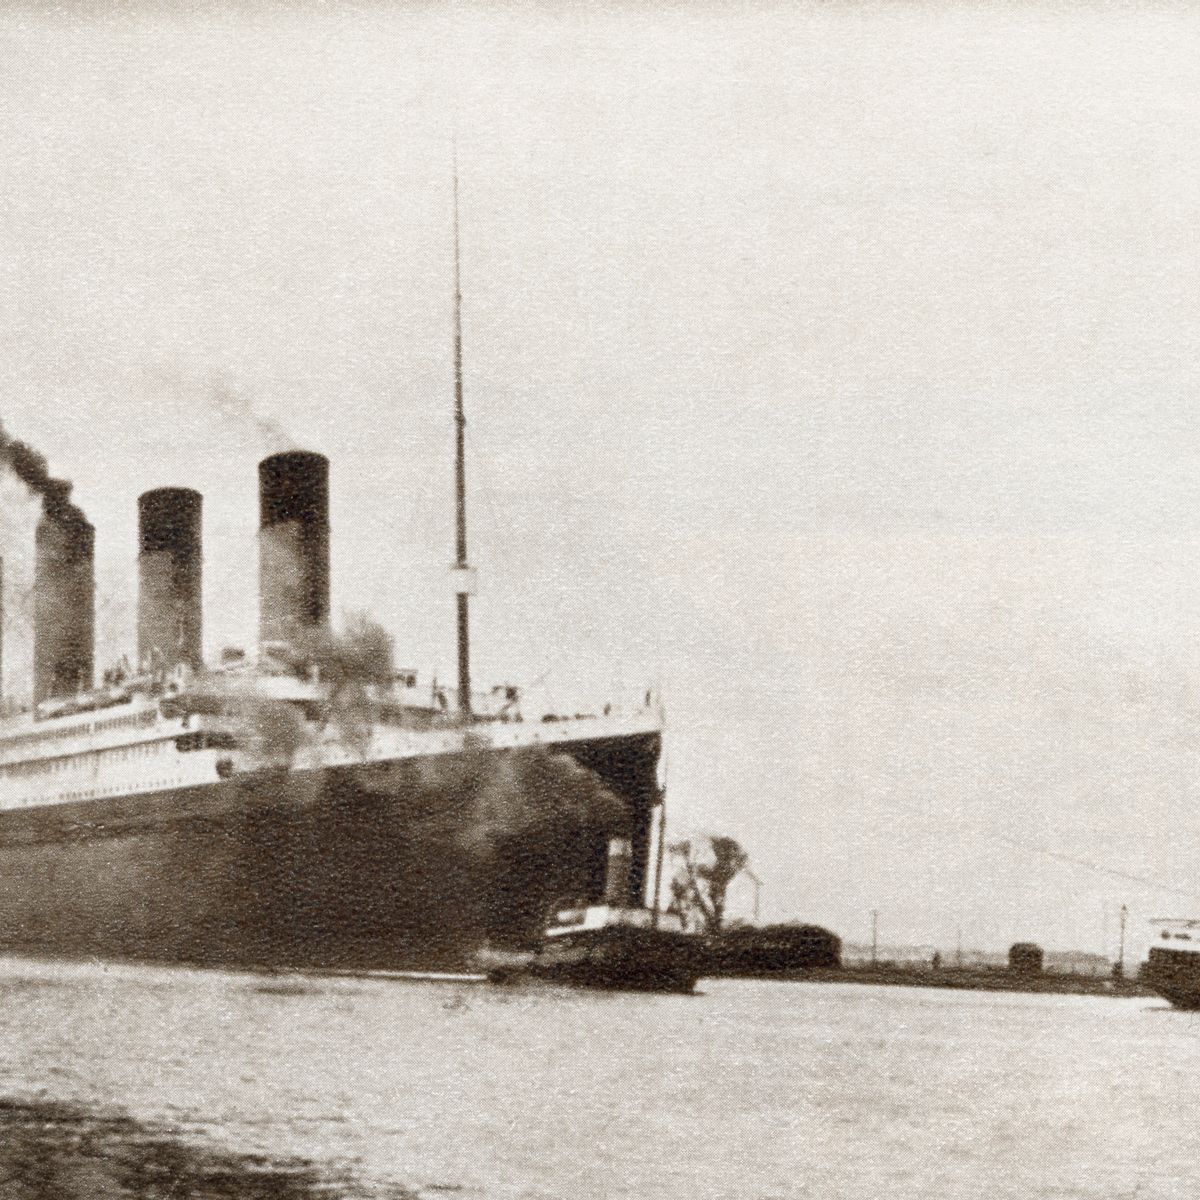 Did an Untamed Coal Fire Sink the Titanic? 